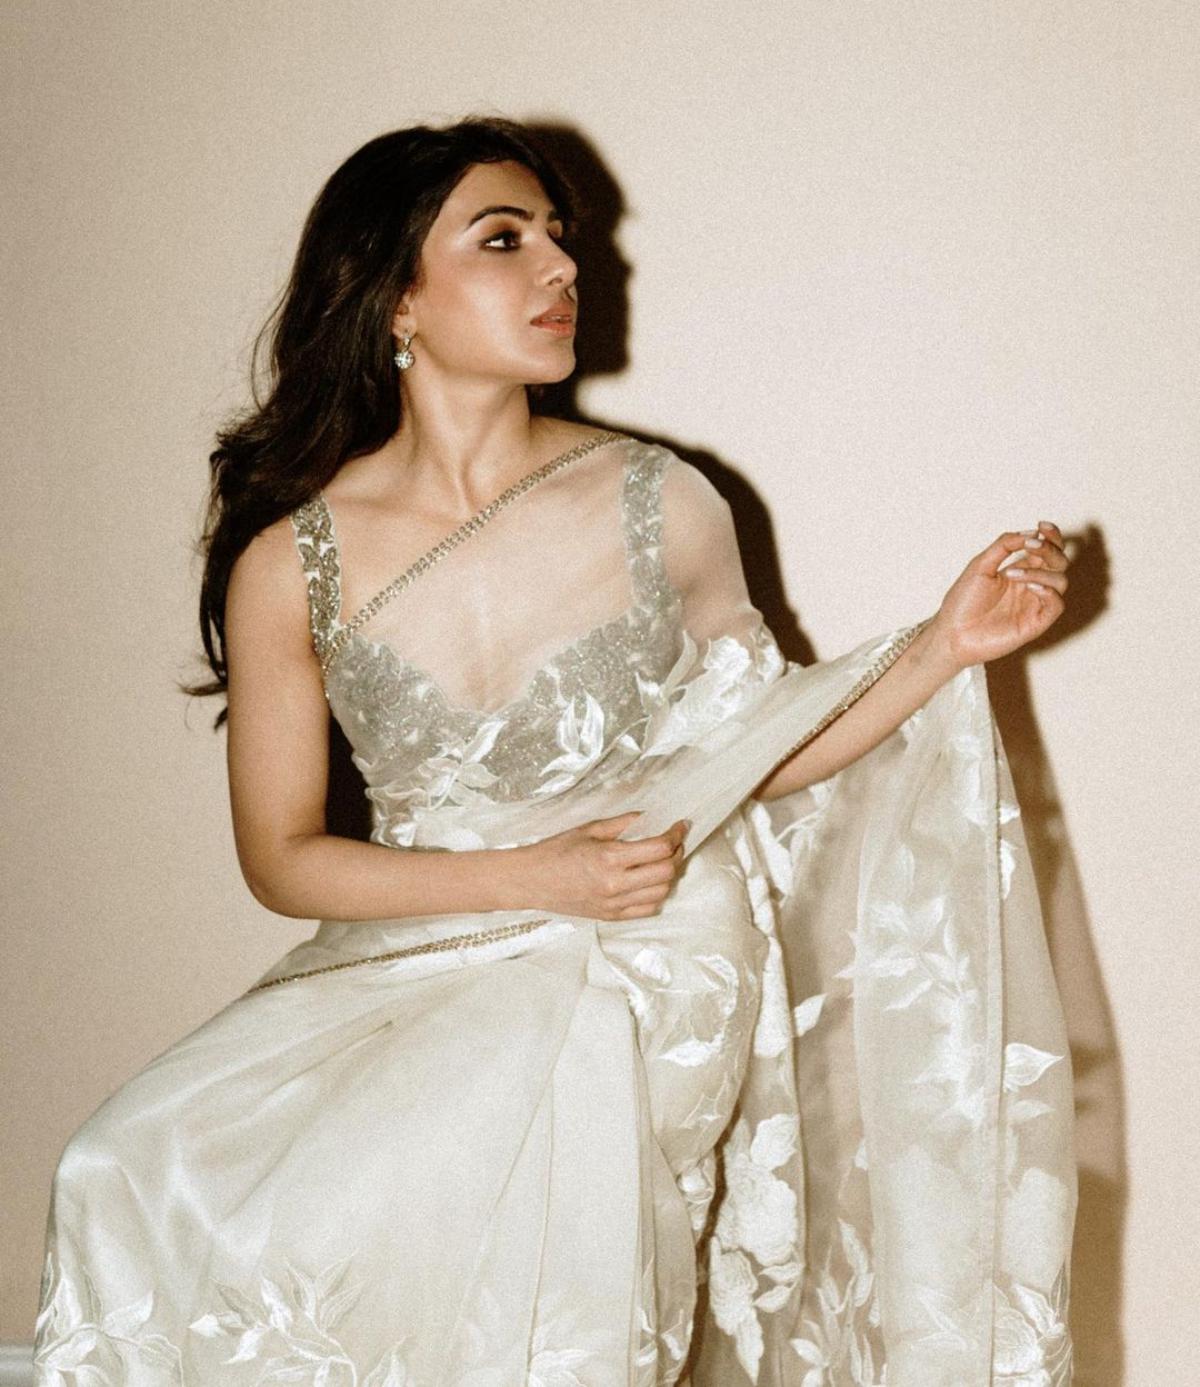 Draped in a dreamy off-white saree, our beloved South beauty is a vision to behold as she elegantly poses for a photo. To add a dash of glamour, the actor opted for an embellished blouse with intricate floral patterns. While her saree had aesthetic floral embroidery, the border of her saree which was beautifully designed with gold diamonds was worked like magic and made the star look even more magical and mesmerising.